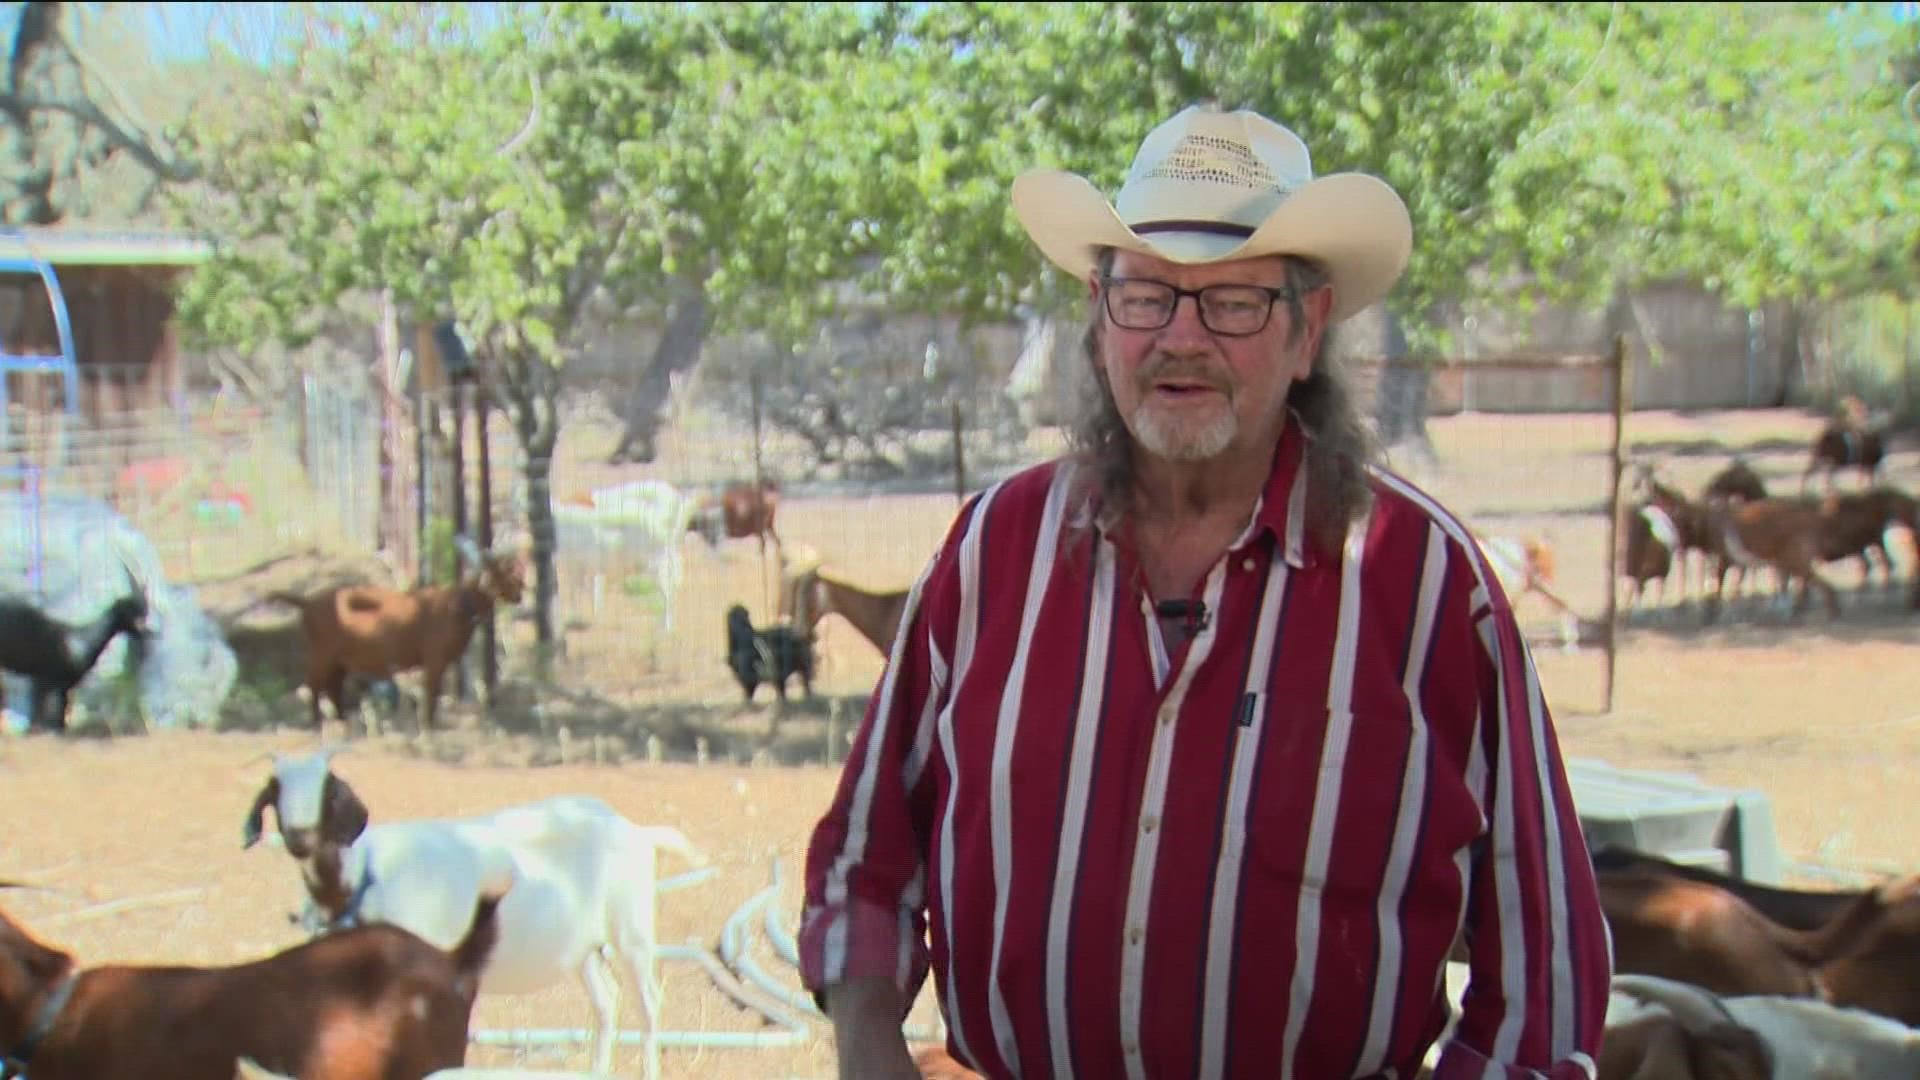 KVUE spoke with one man who had to race from North Austin to the Henly area to save his herd of goats while his friend's property burned.